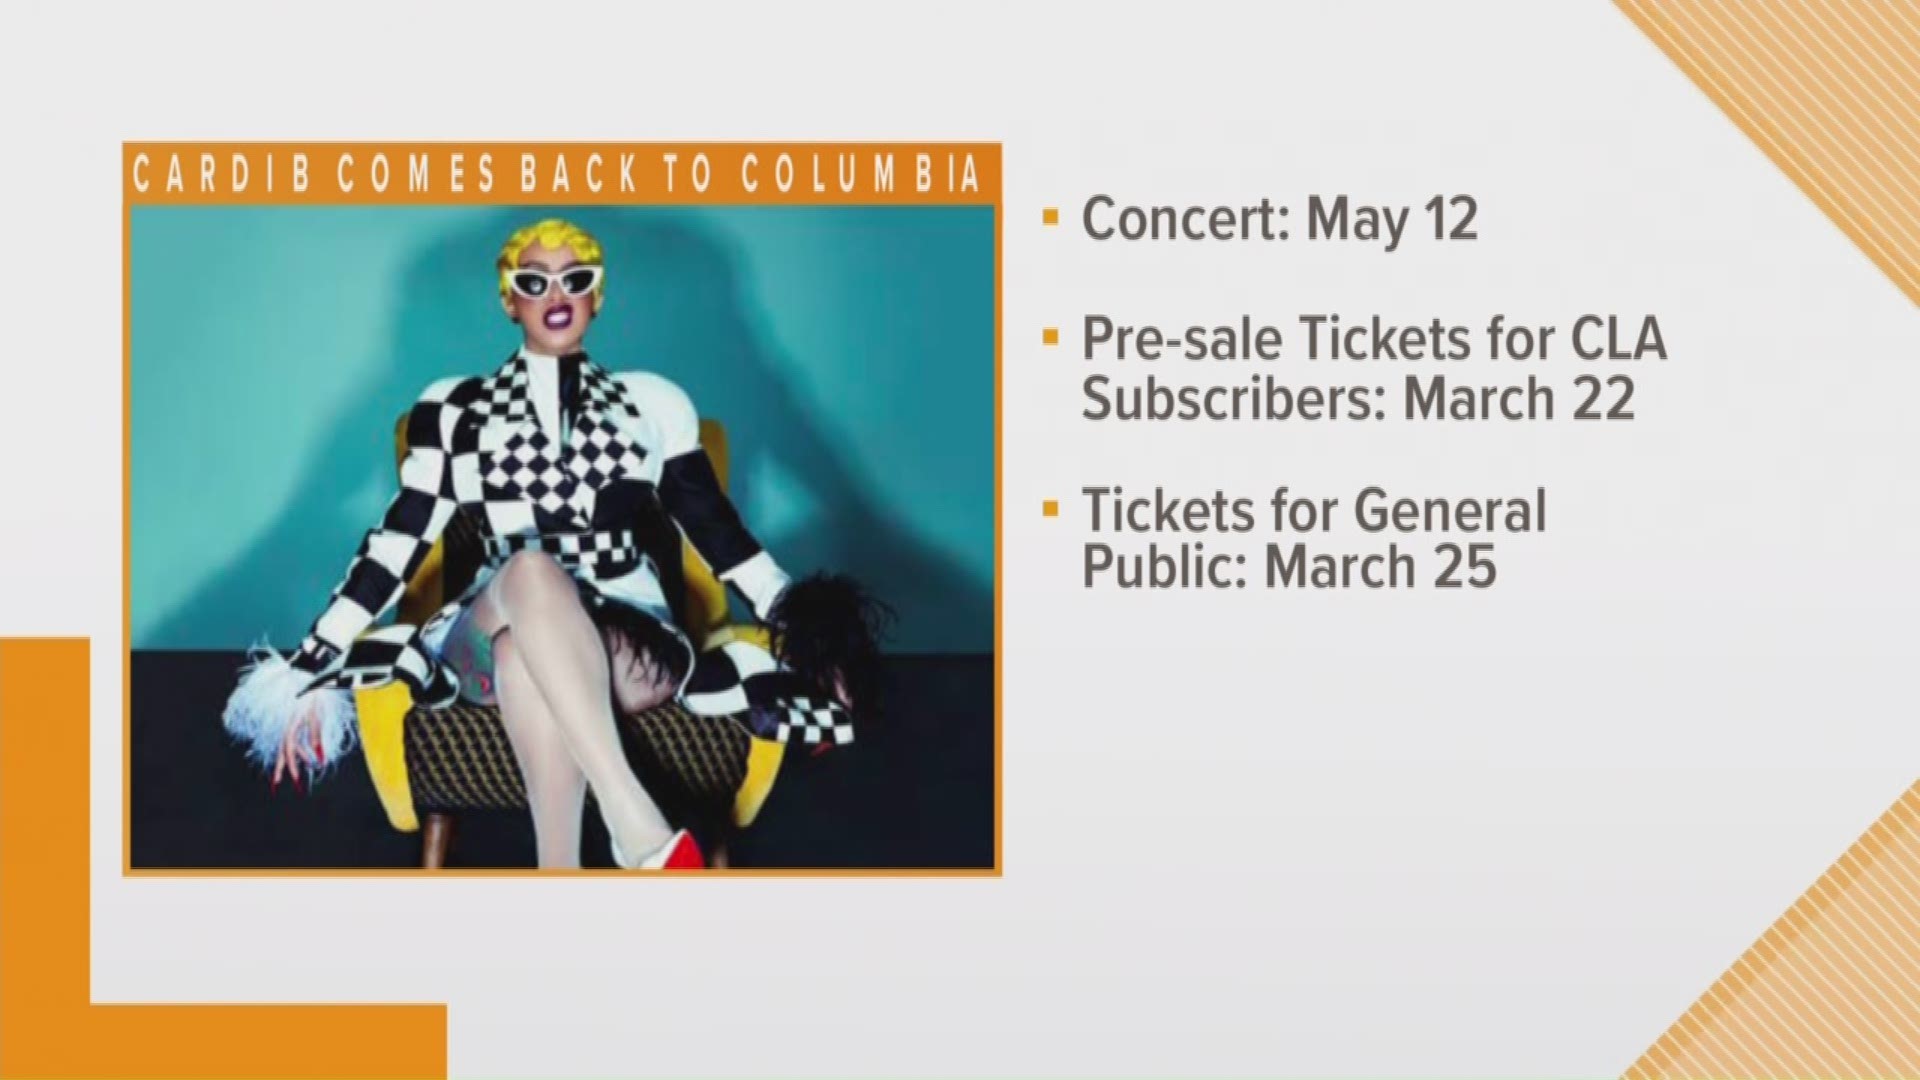 Grammy-winner Cardi B is returning to Columbia for a concert in May.